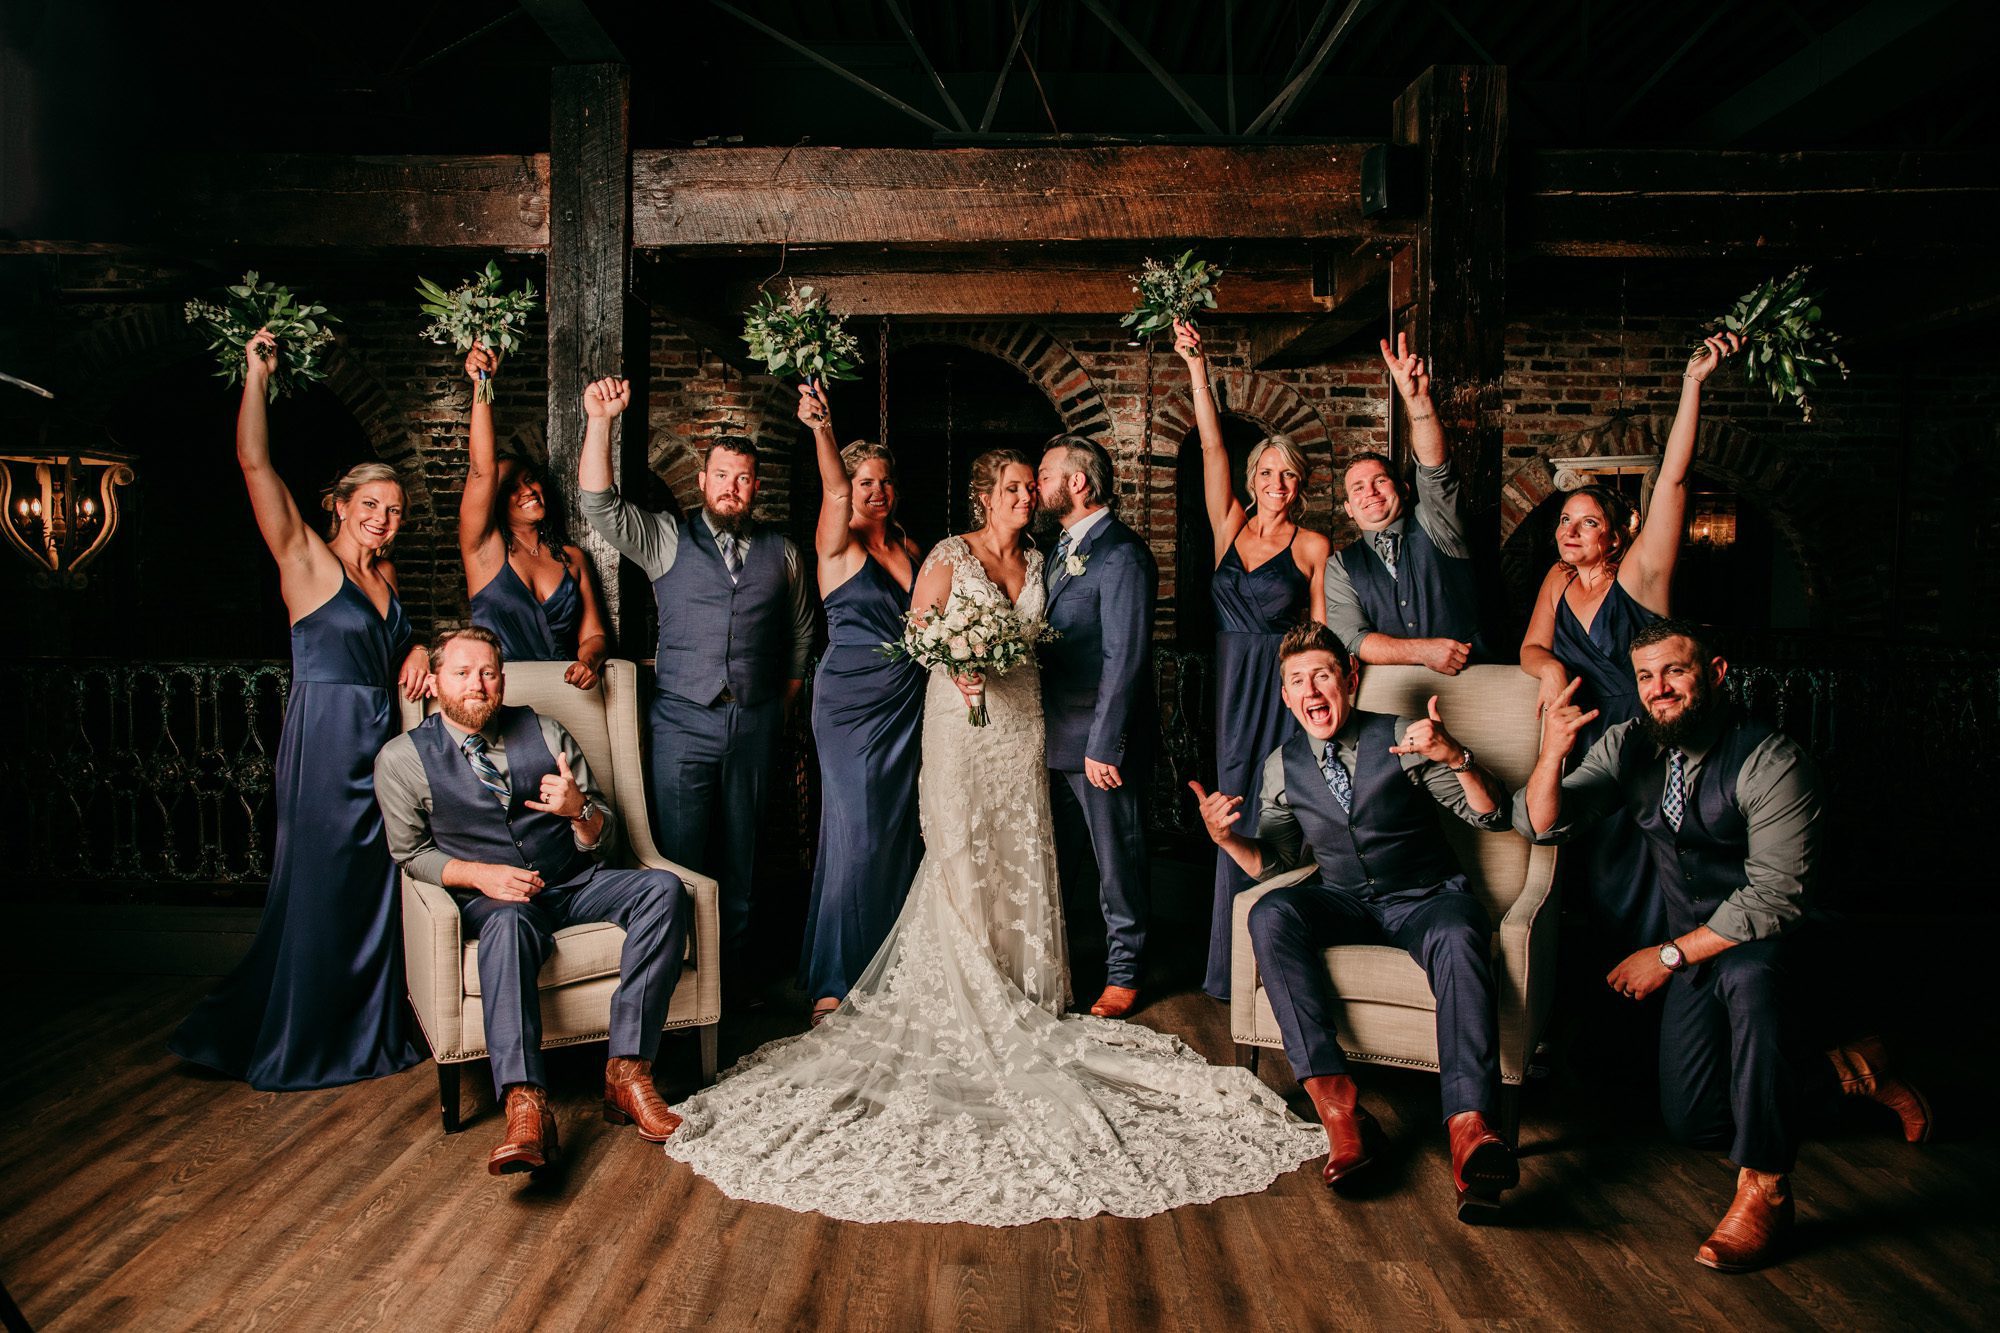 Bridal party groomsmen and bridesmaids upstairs inside a vintage brick building old world charm at the Bedford event and wedding venue in Nashville TN. Photo by Krista Lee Photography